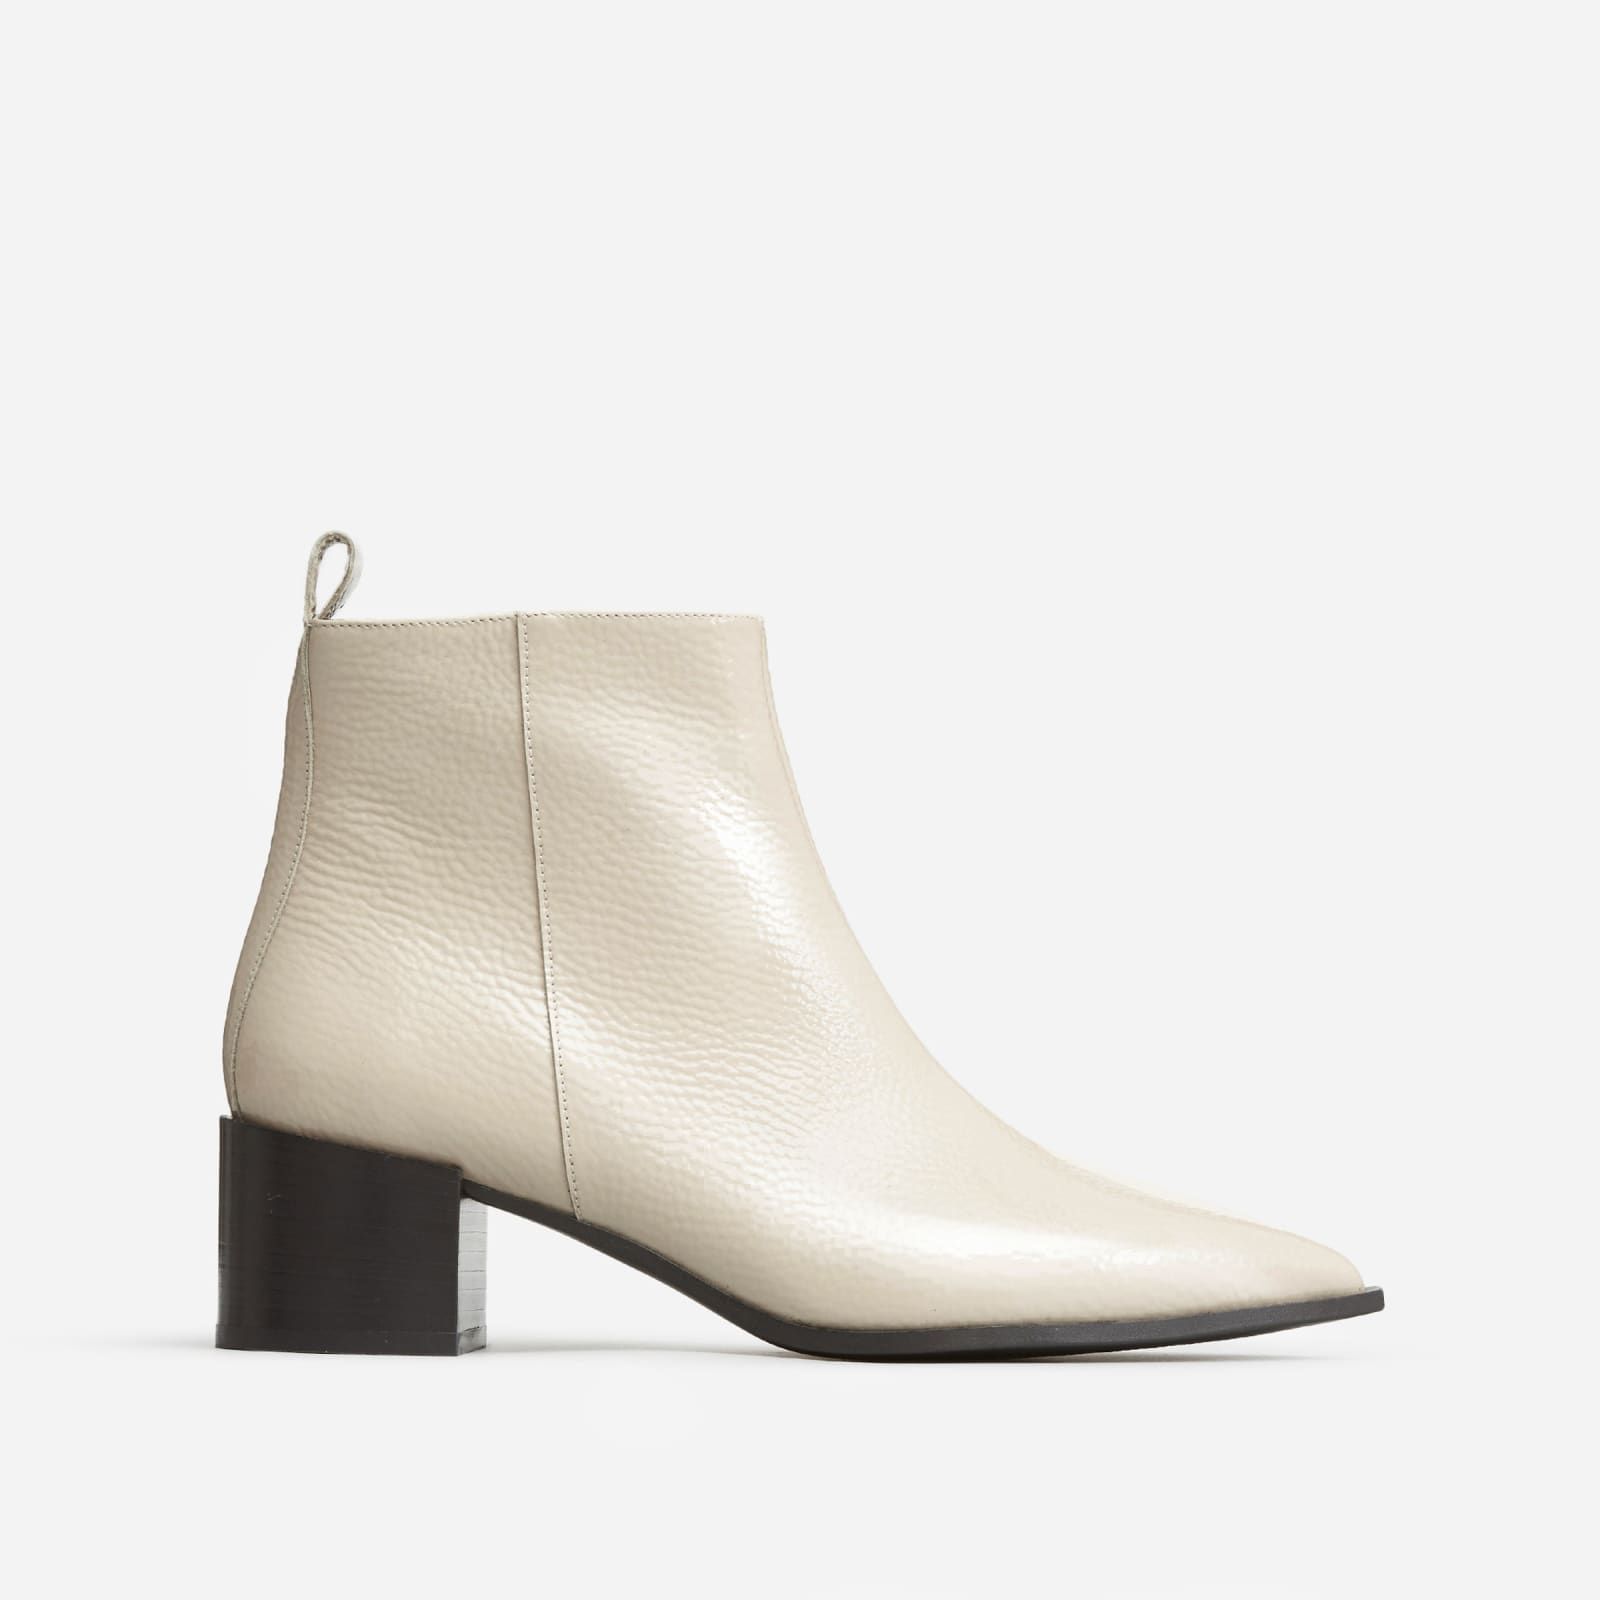 Boss Boot by Everlane in Bone Patent, Size 8.5 | Everlane